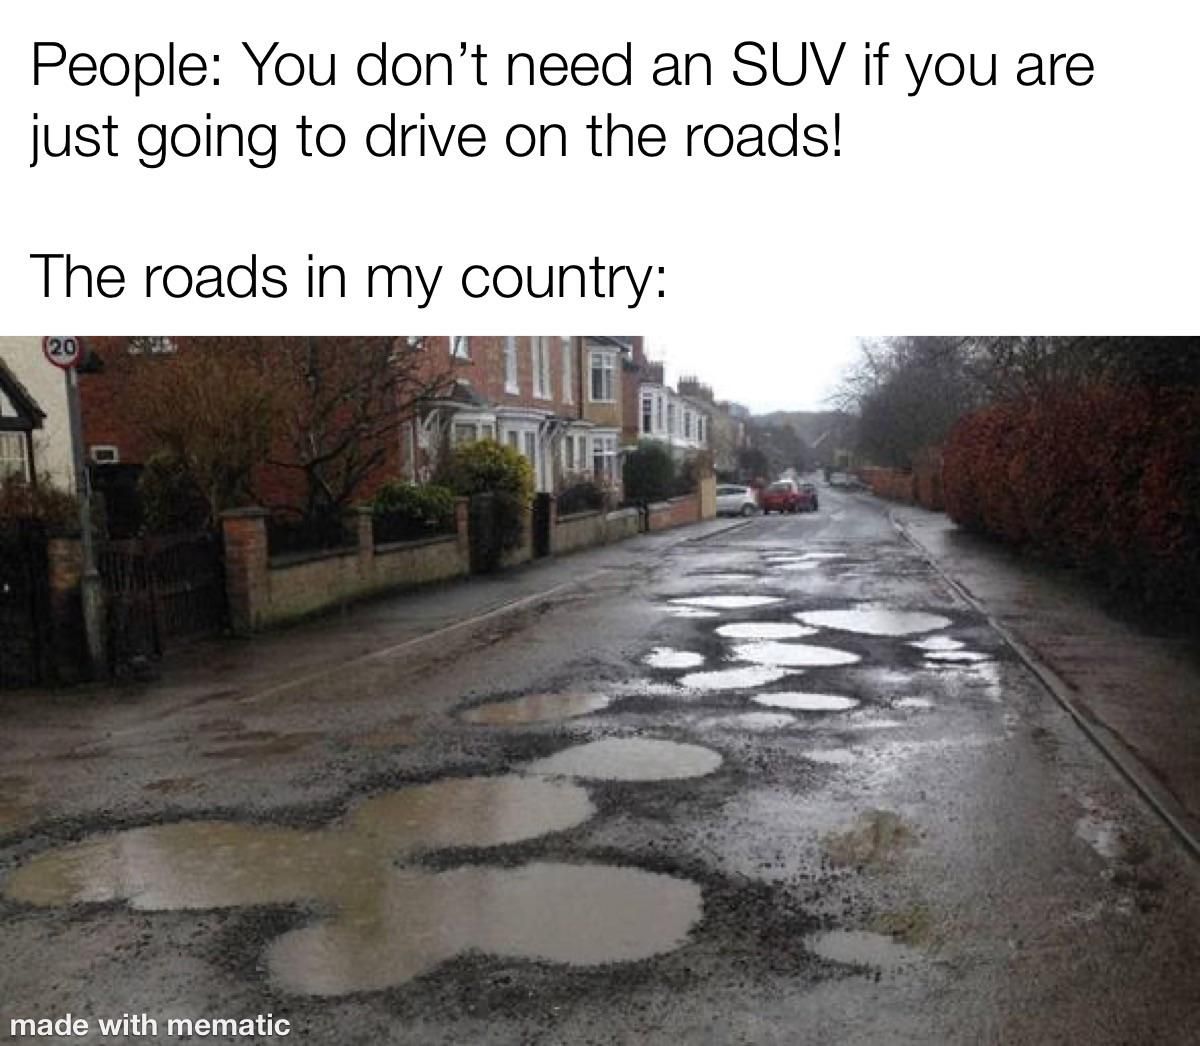 It’s nicer to drive off the road than on it.